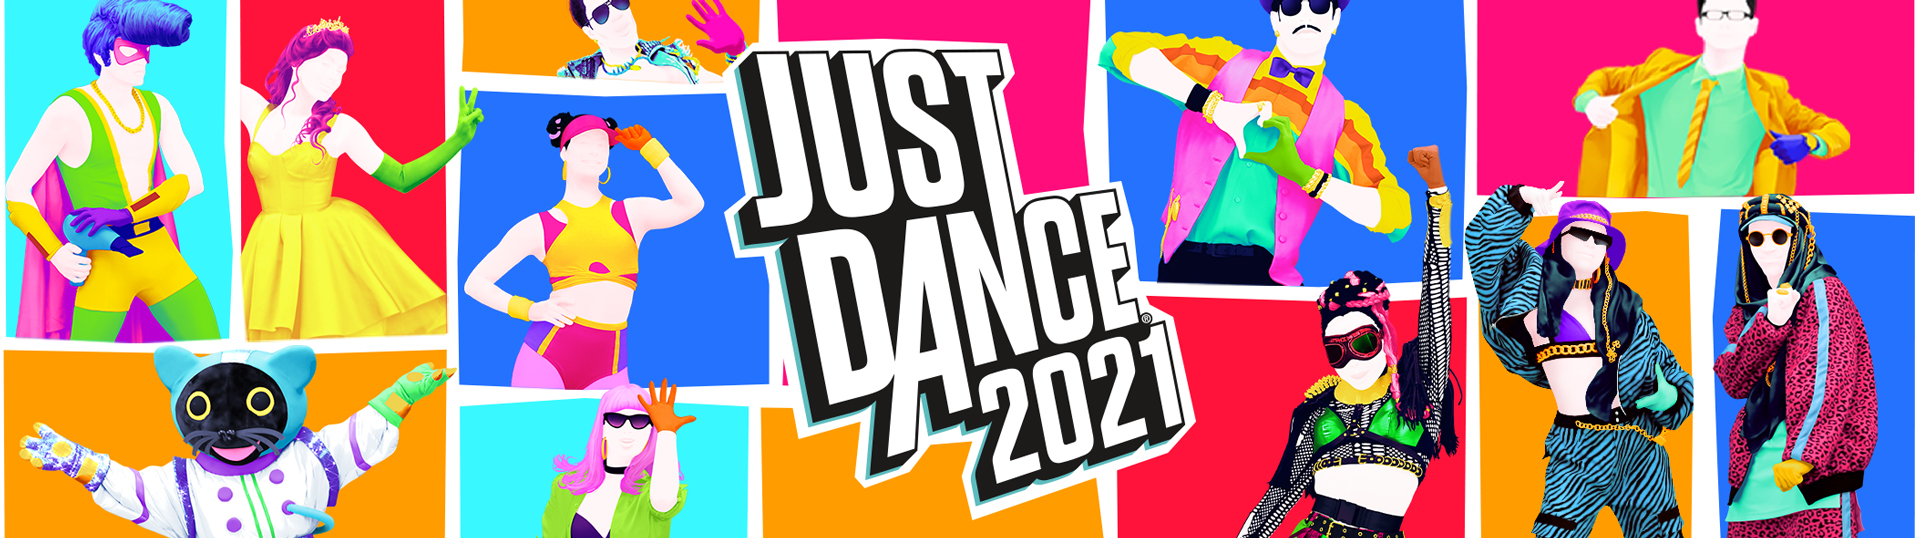 Buy Just Dance 2021 PS4 Editions | Ubisoft Store